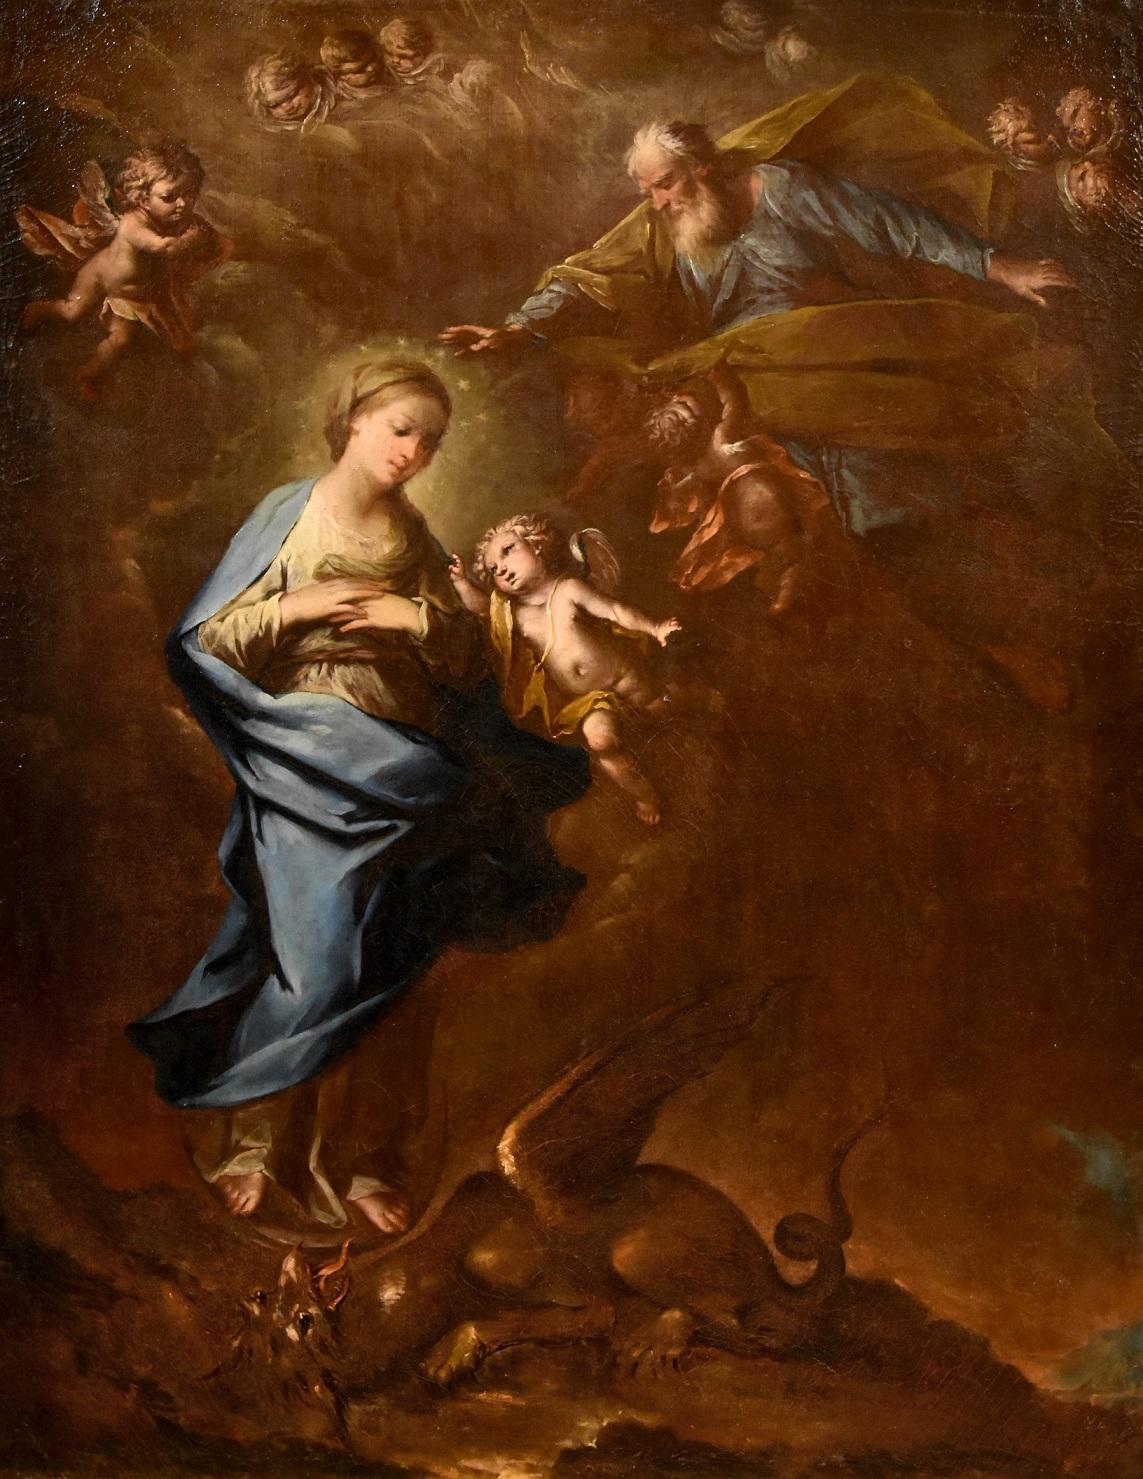 Immaculate Virgin Pietro Da Cortona Paint Oil on canvas Old master 17th Century  - Painting by  Pietro da Cortona, born as Pietro Berrettini (Cortona 1597 - Rome 1669)